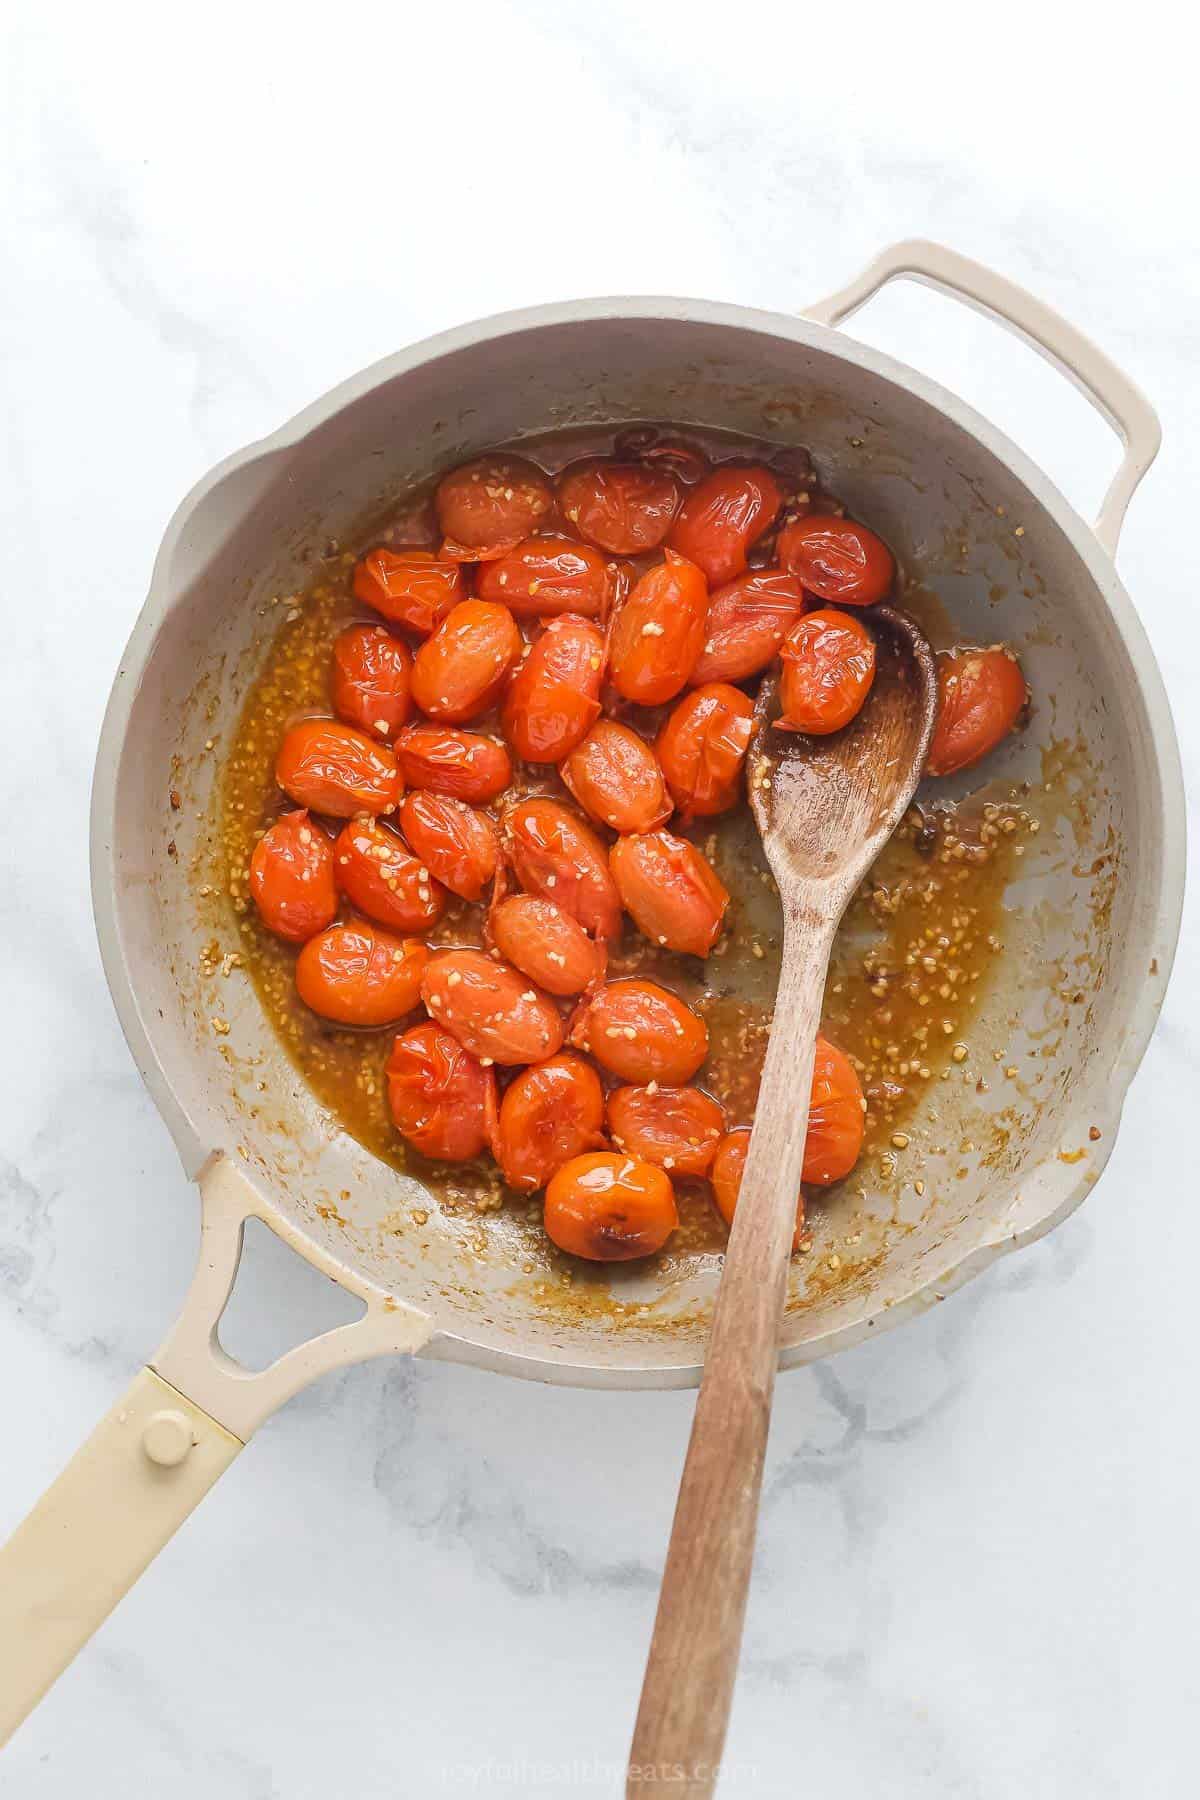 Cooking the tomatoes in the pan.